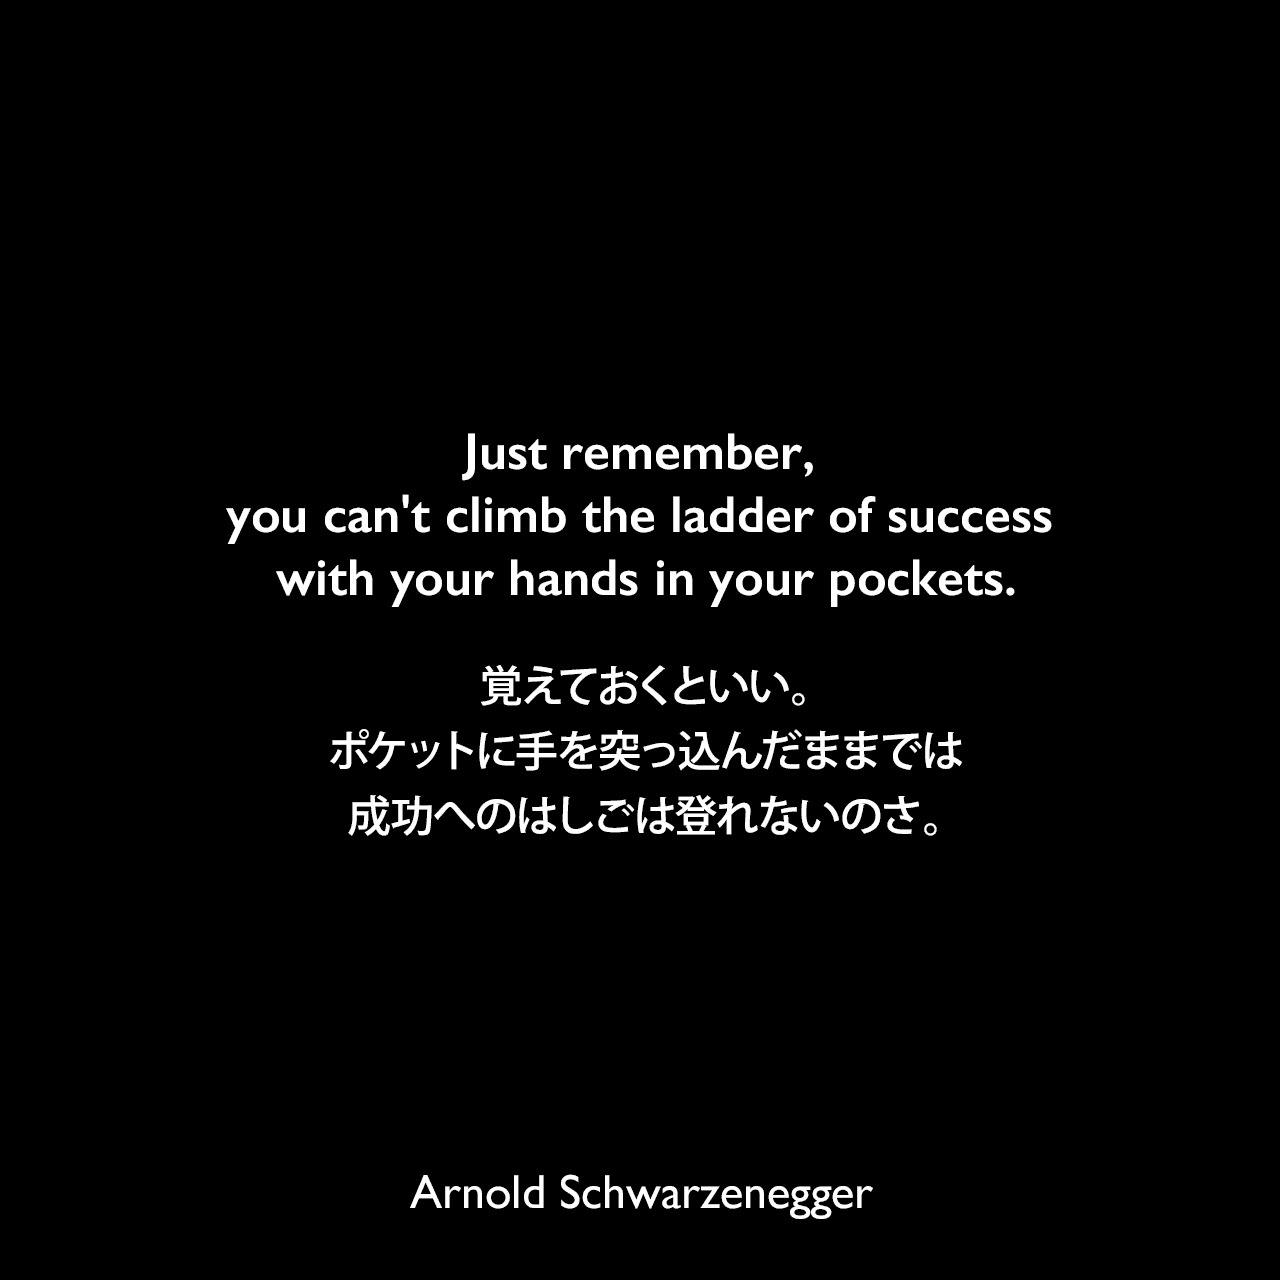 Just remember, you can't climb the ladder of success with your hands in your pockets.覚えておくといい。ポケットに手を突っ込んだままでは成功へのはしごは登れないのさ。Arnold Schwarzenegger